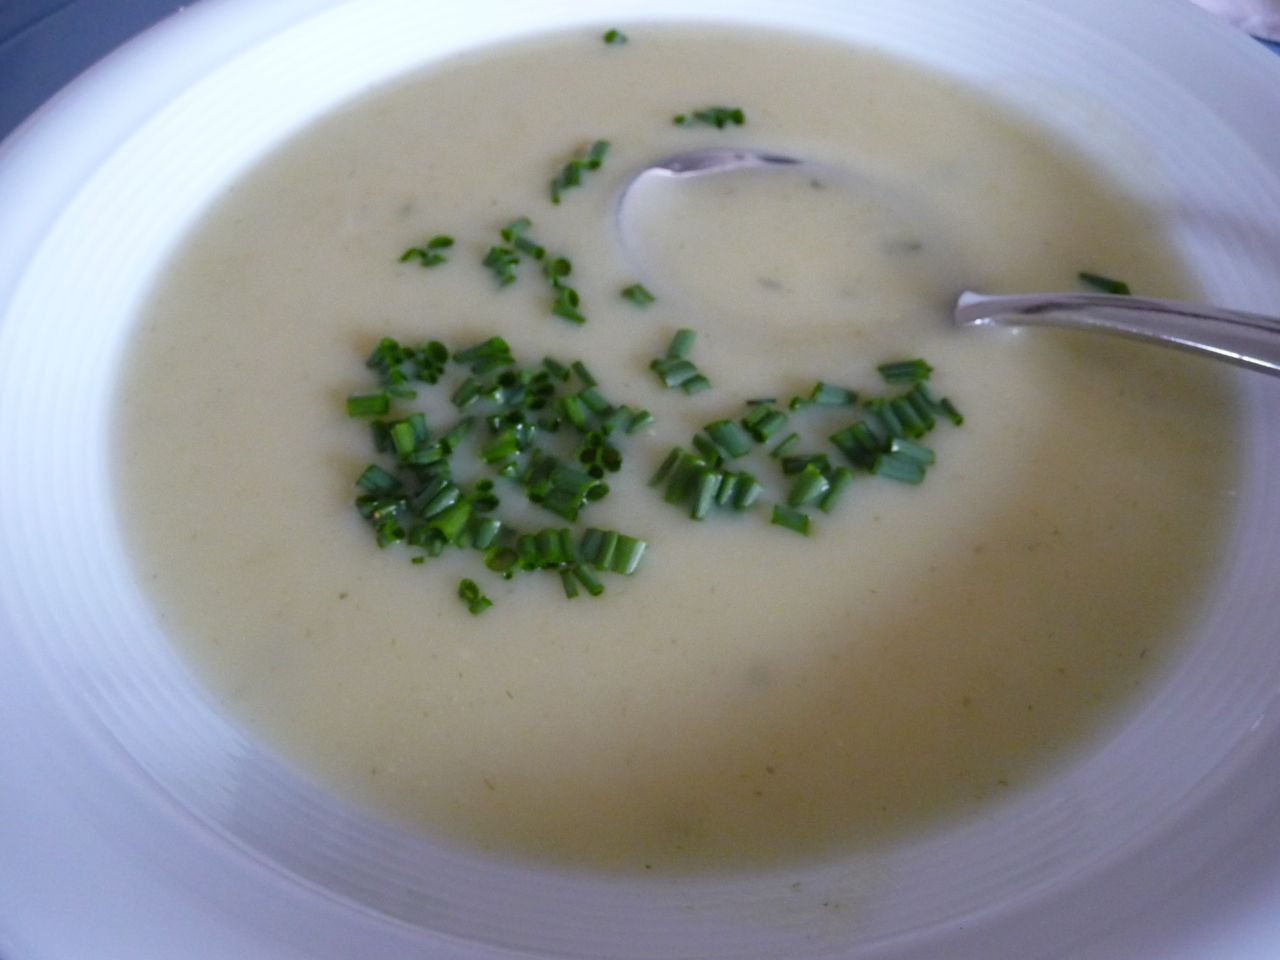 Fenchelcremesuppe